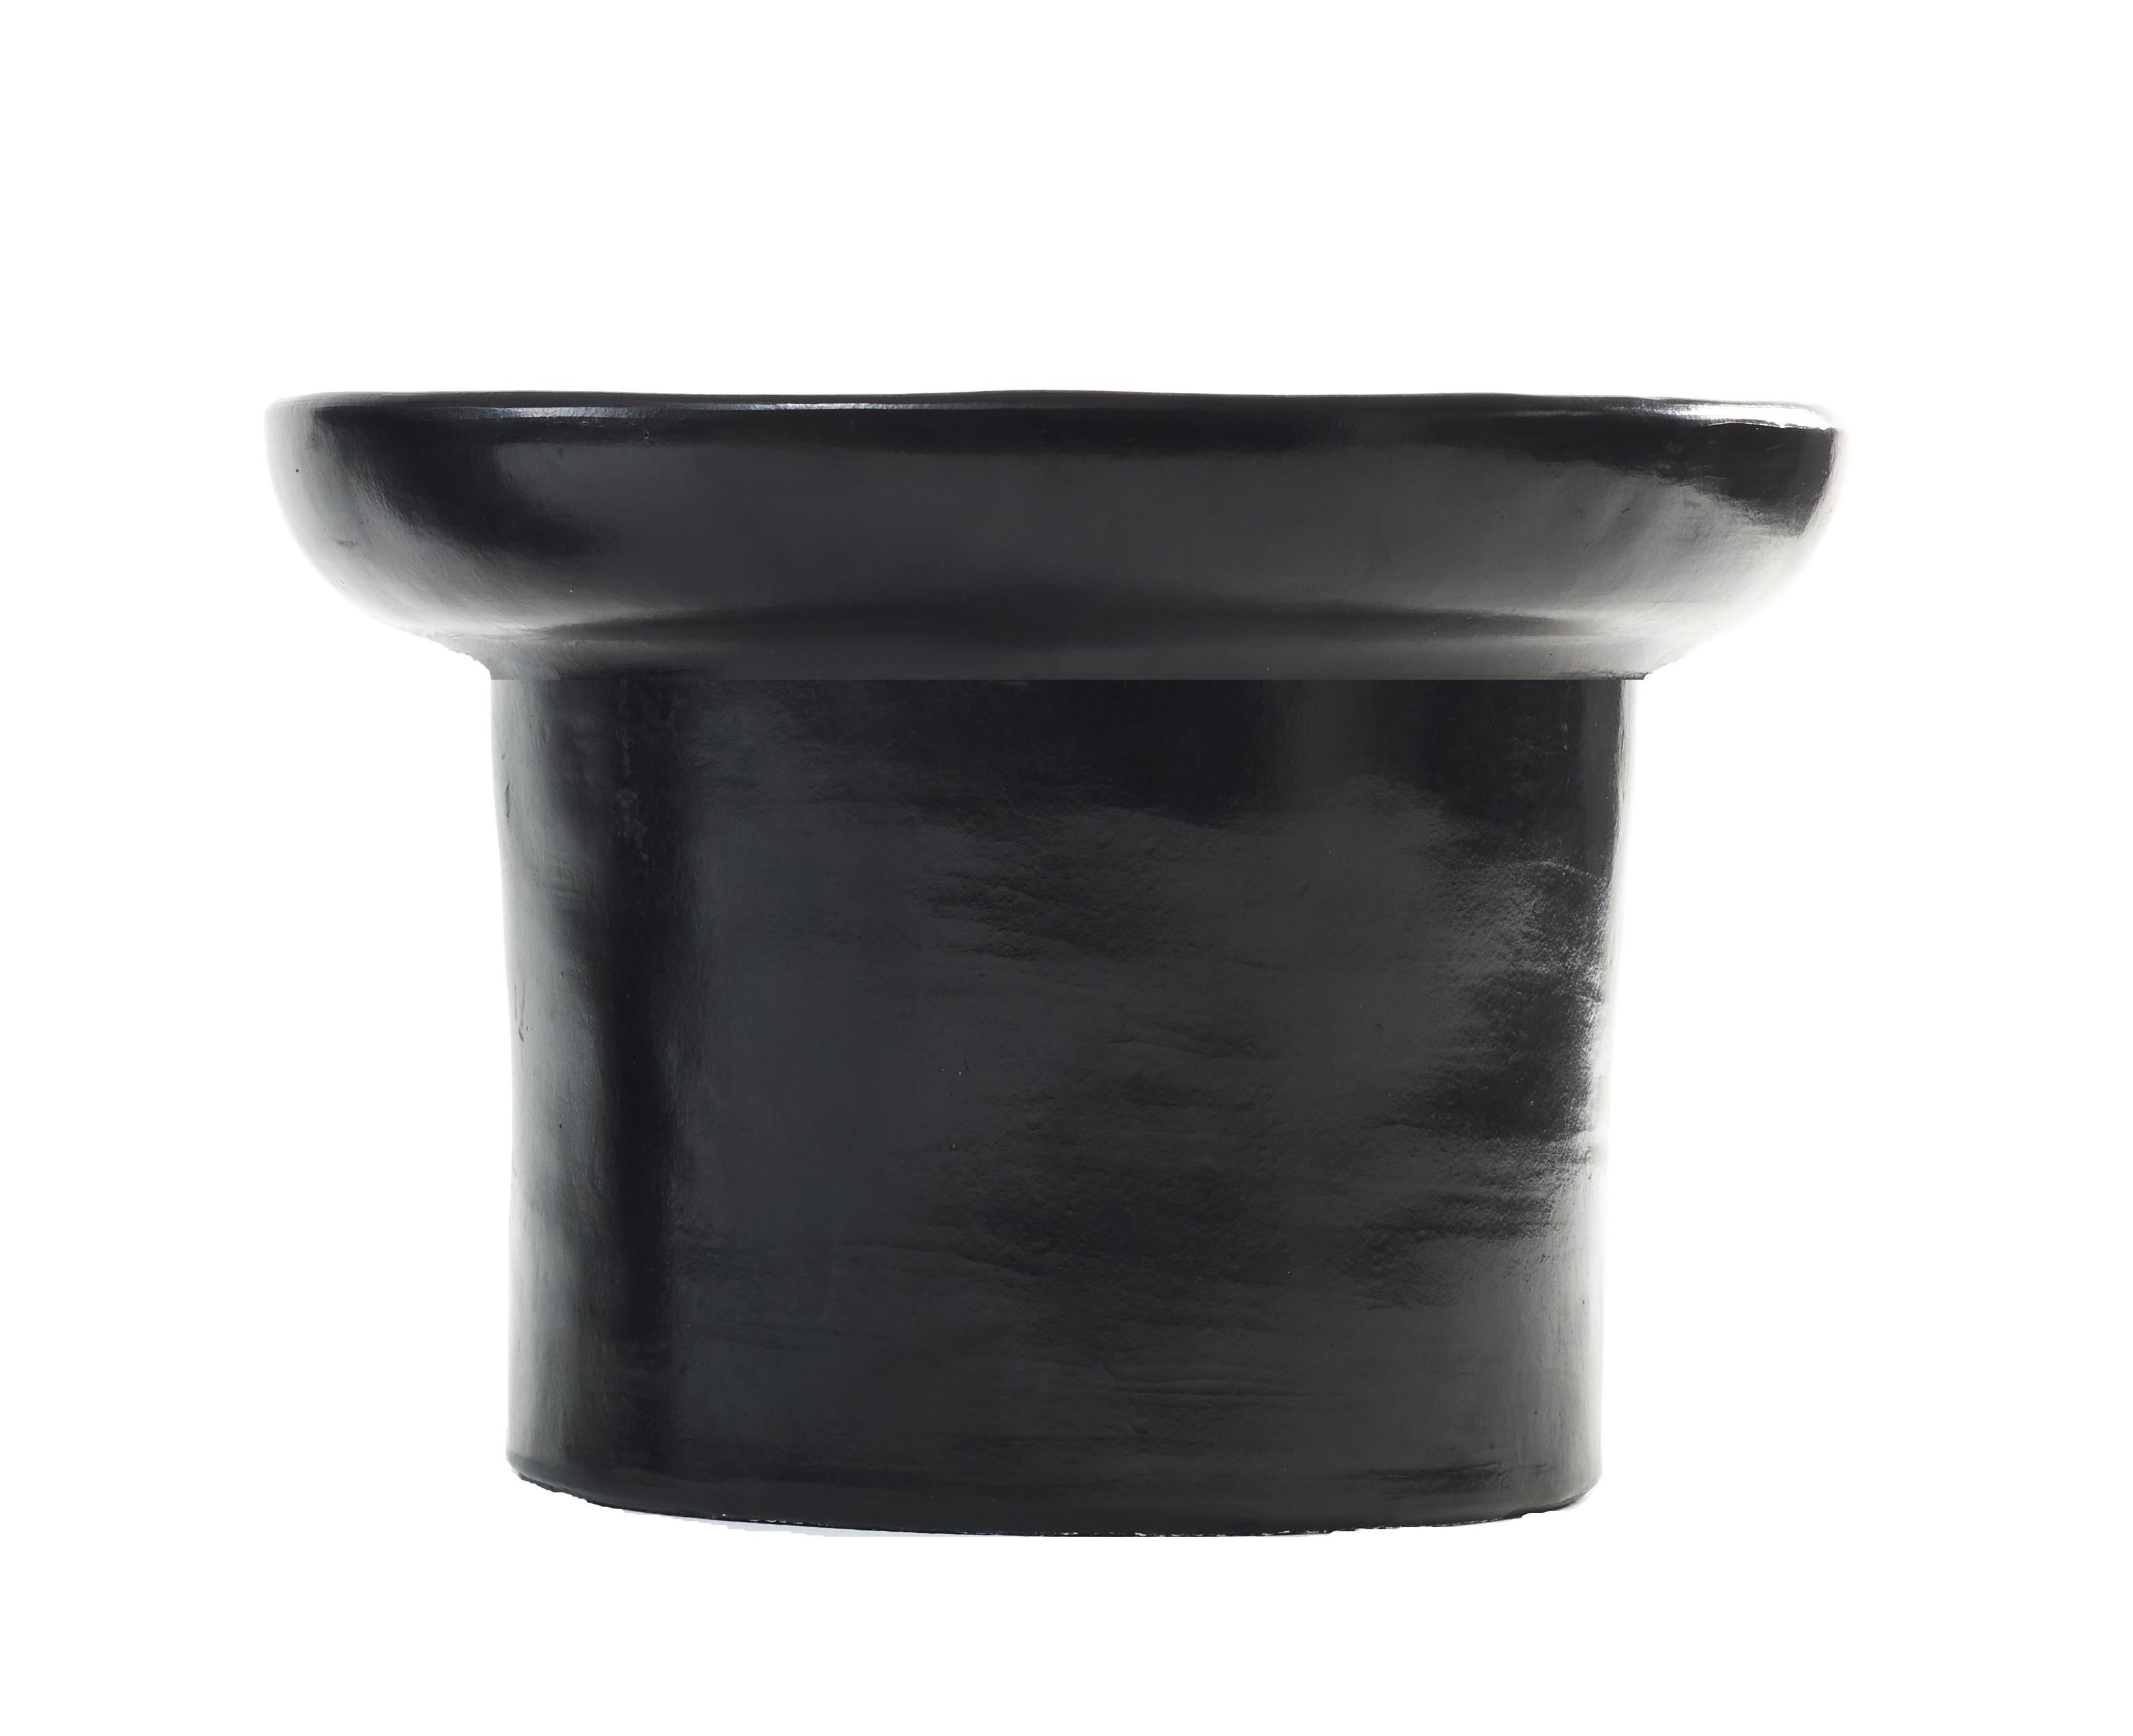 Black small nuna side table by Sebastian Herkner
Materials: Heat-resistant black and red ceramic. 
Technique: Glazed. Oven cooked and polished with semi-precious stones.
Dimensions: Diameter 42 cm x height 23 cm 
Available in colors red, and